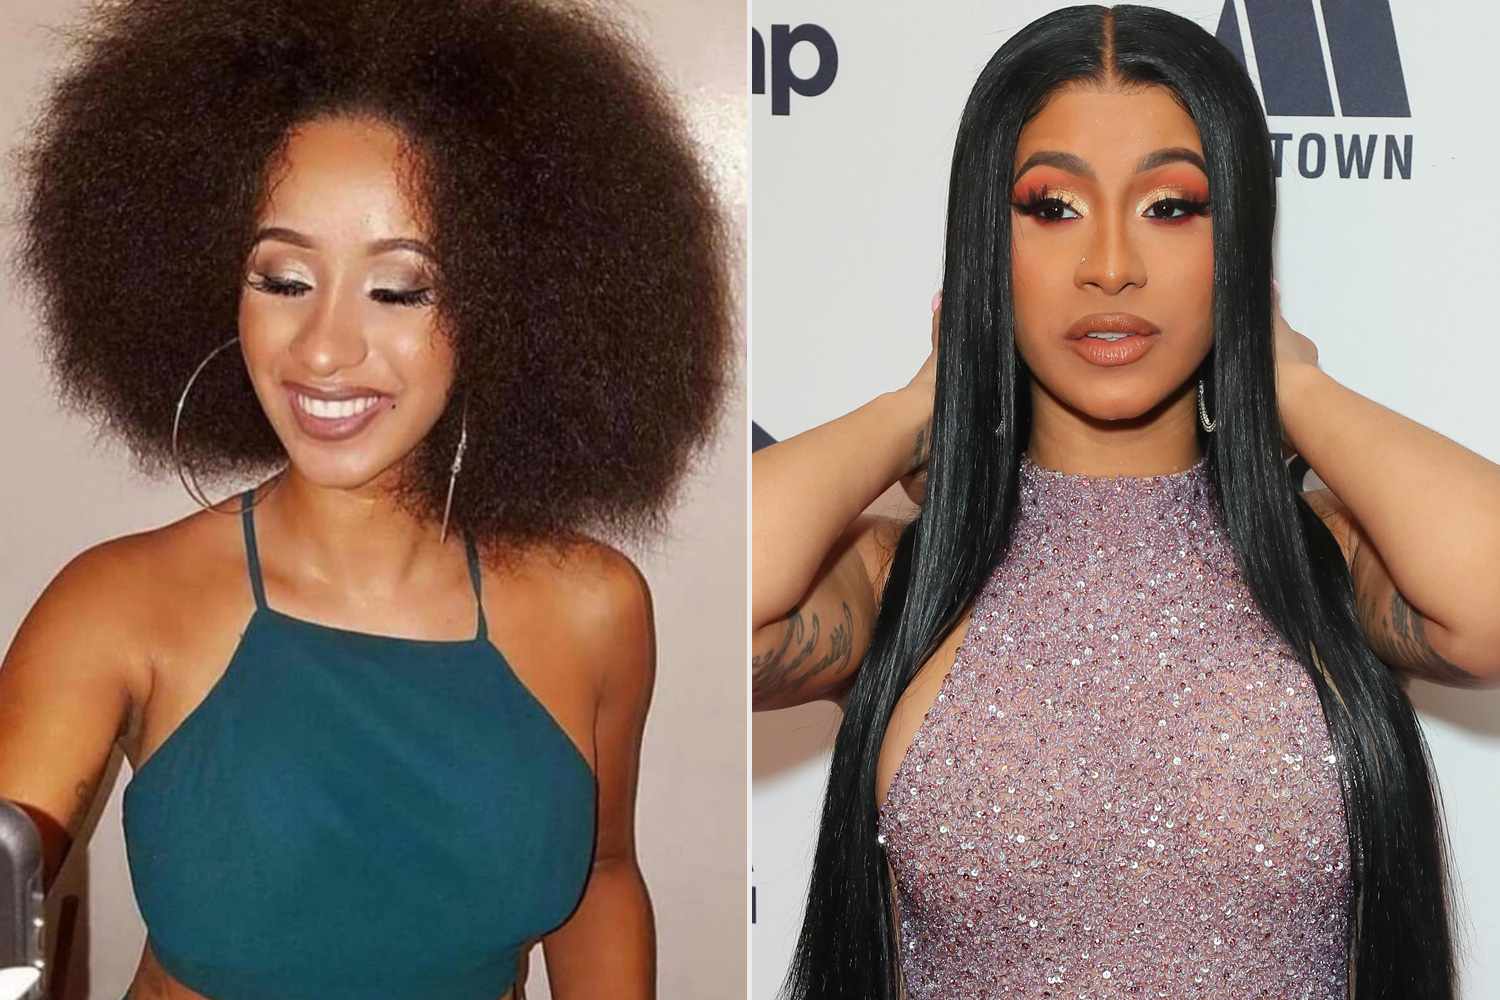 Cardi B Gets Candid About Her Natural Hair Journey: 'There's No Such Thing as Bad Hair'